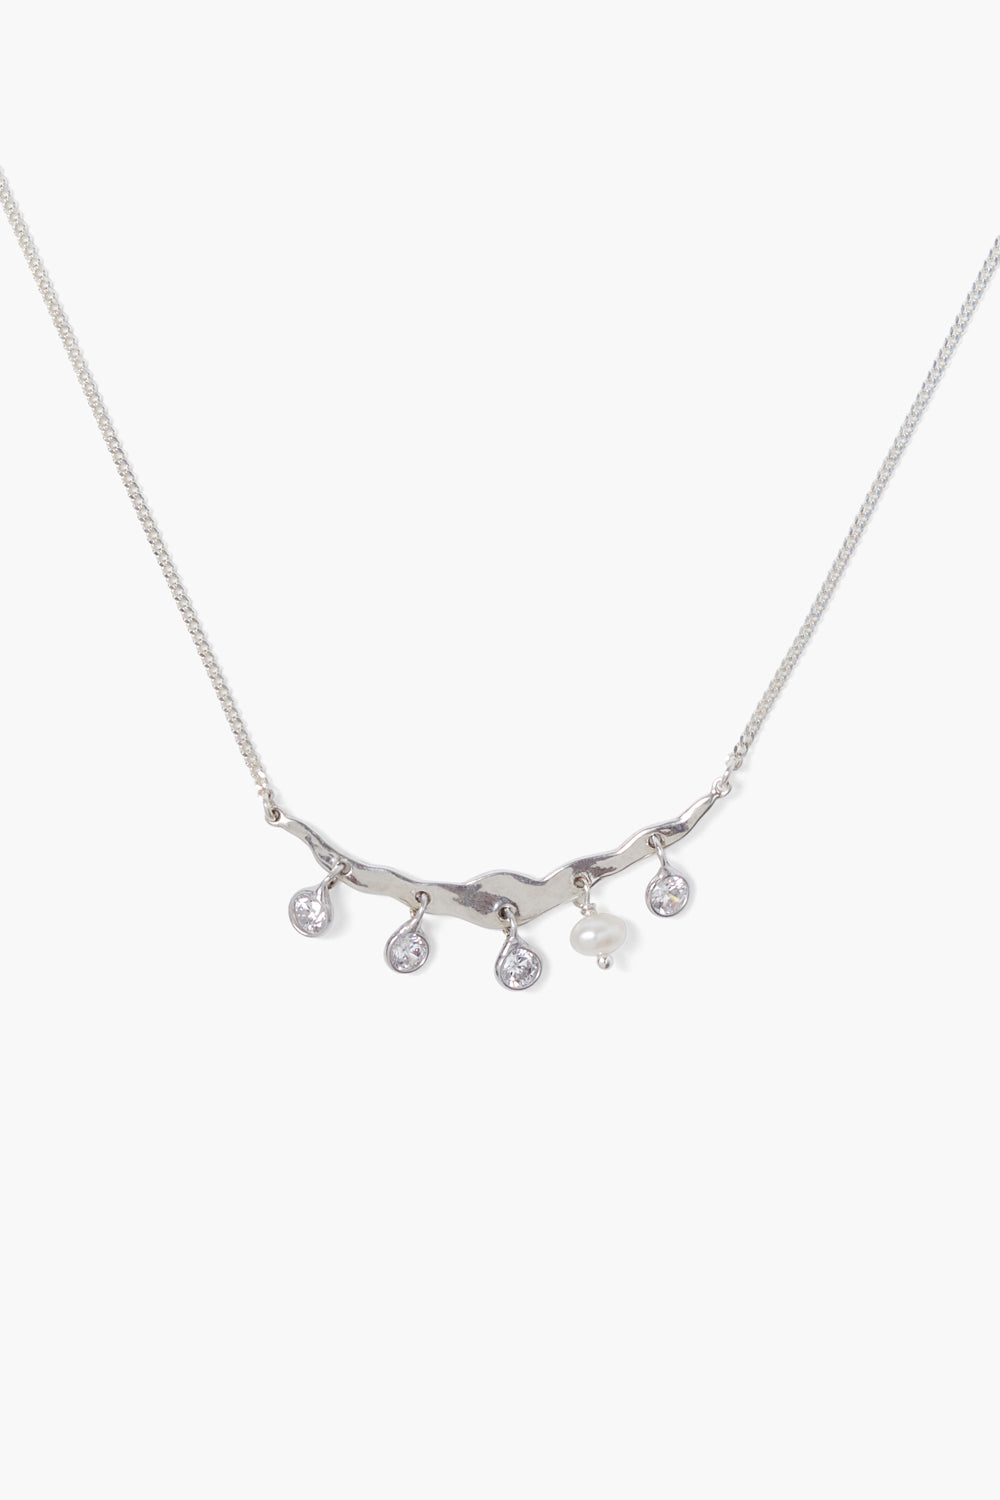 SILVER BEZEL WRAPPED CZ NECKLACE - Kingfisher Road - Online Boutique